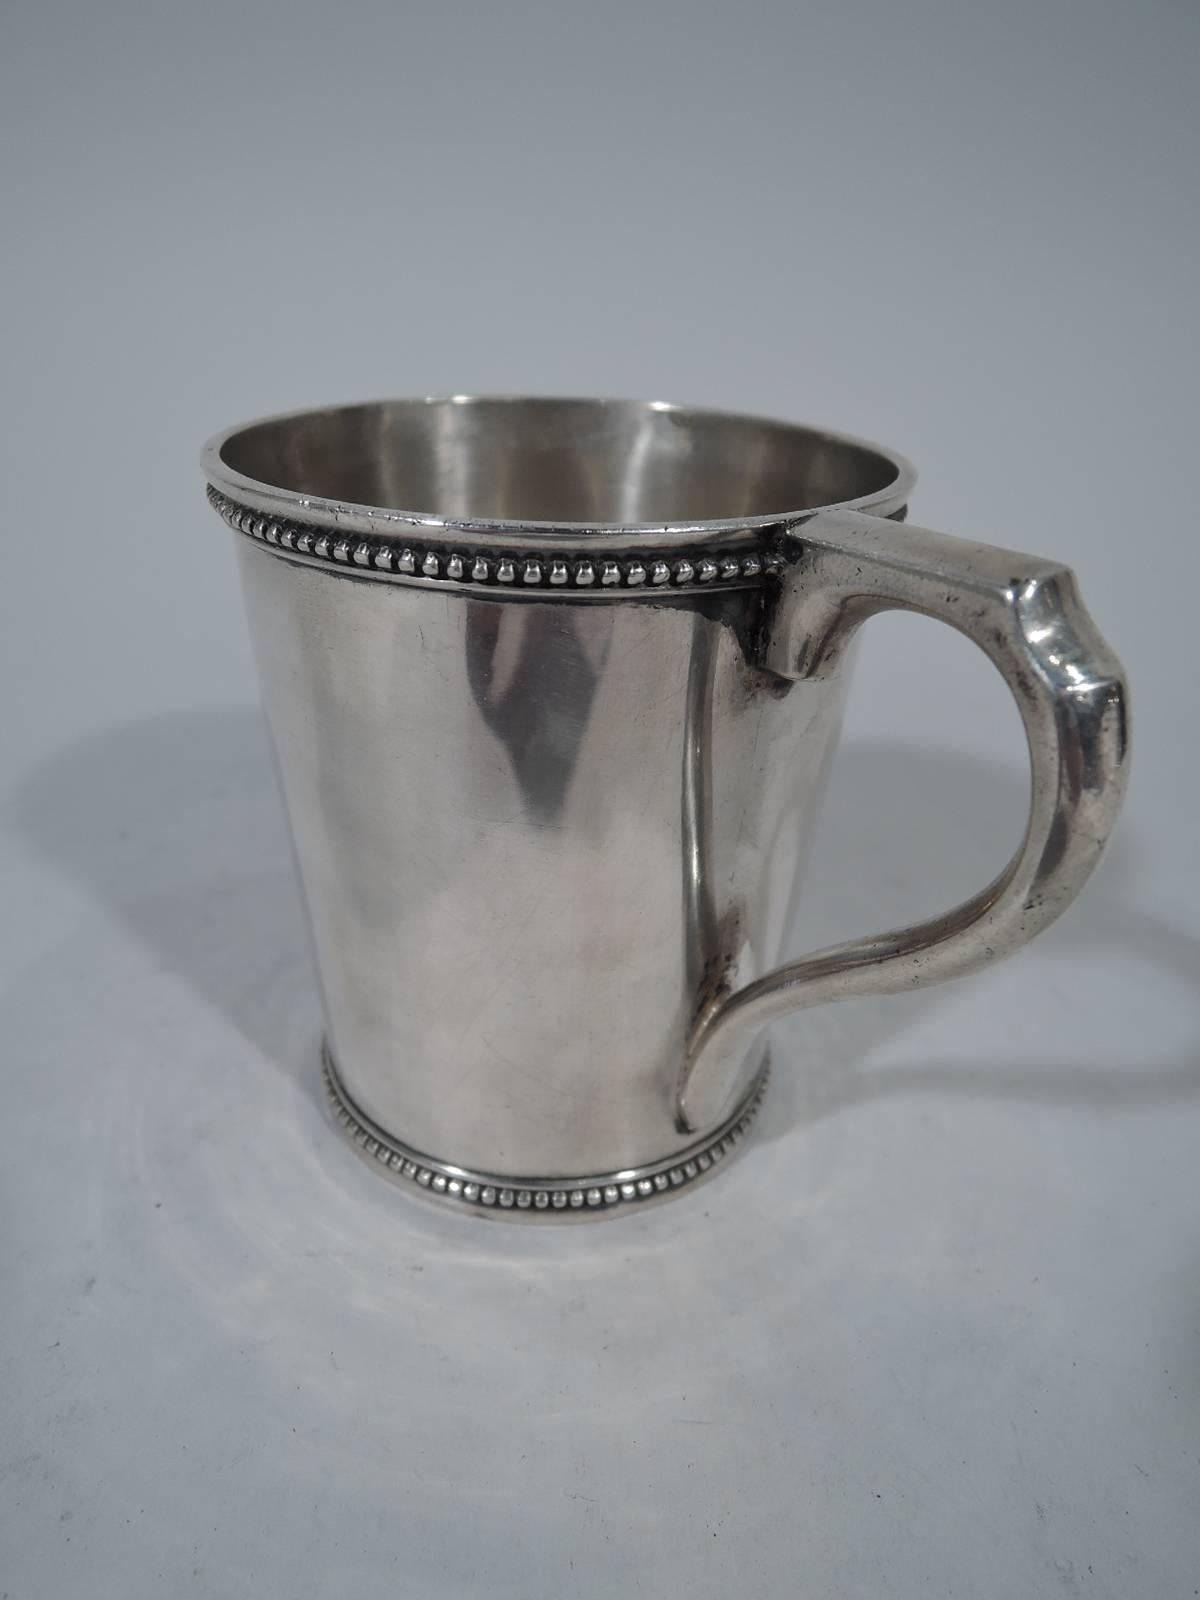 Coin silver christening mug. Straight and tapering sides, beaded rim and foot and scroll bracket handle. A sweet piece that awaits the name of a 21st century newborn. Hallmarked Newell Harding, a Boston maker active in the first half of the 19th